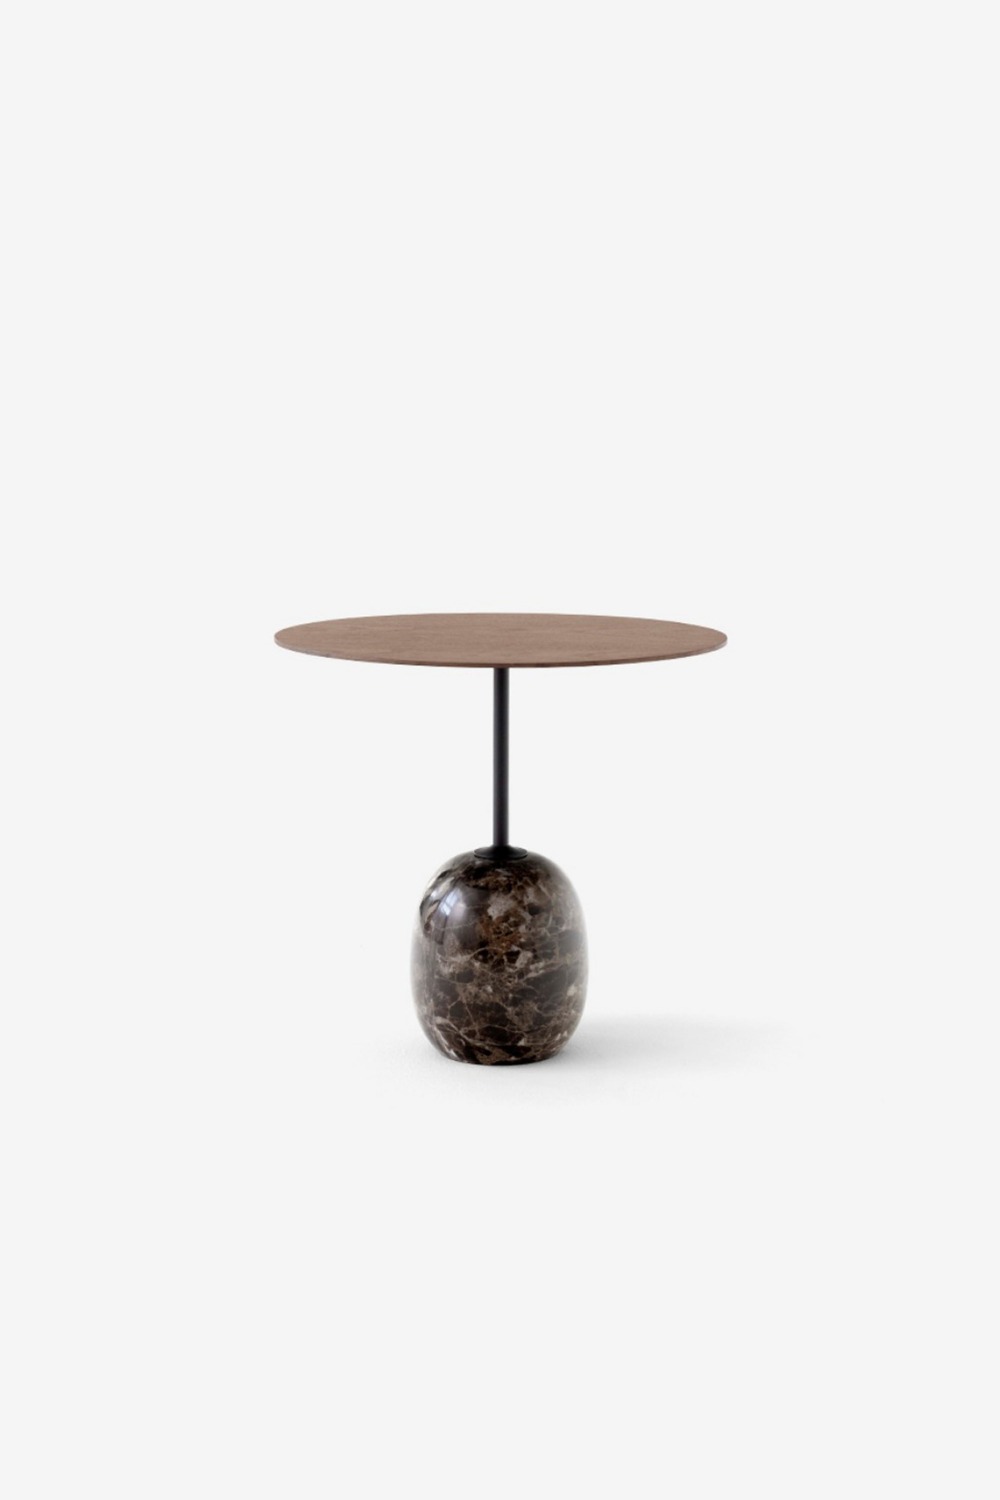 [&amp;Tradition] Lato side table / LN9 (Walnut-Oval)